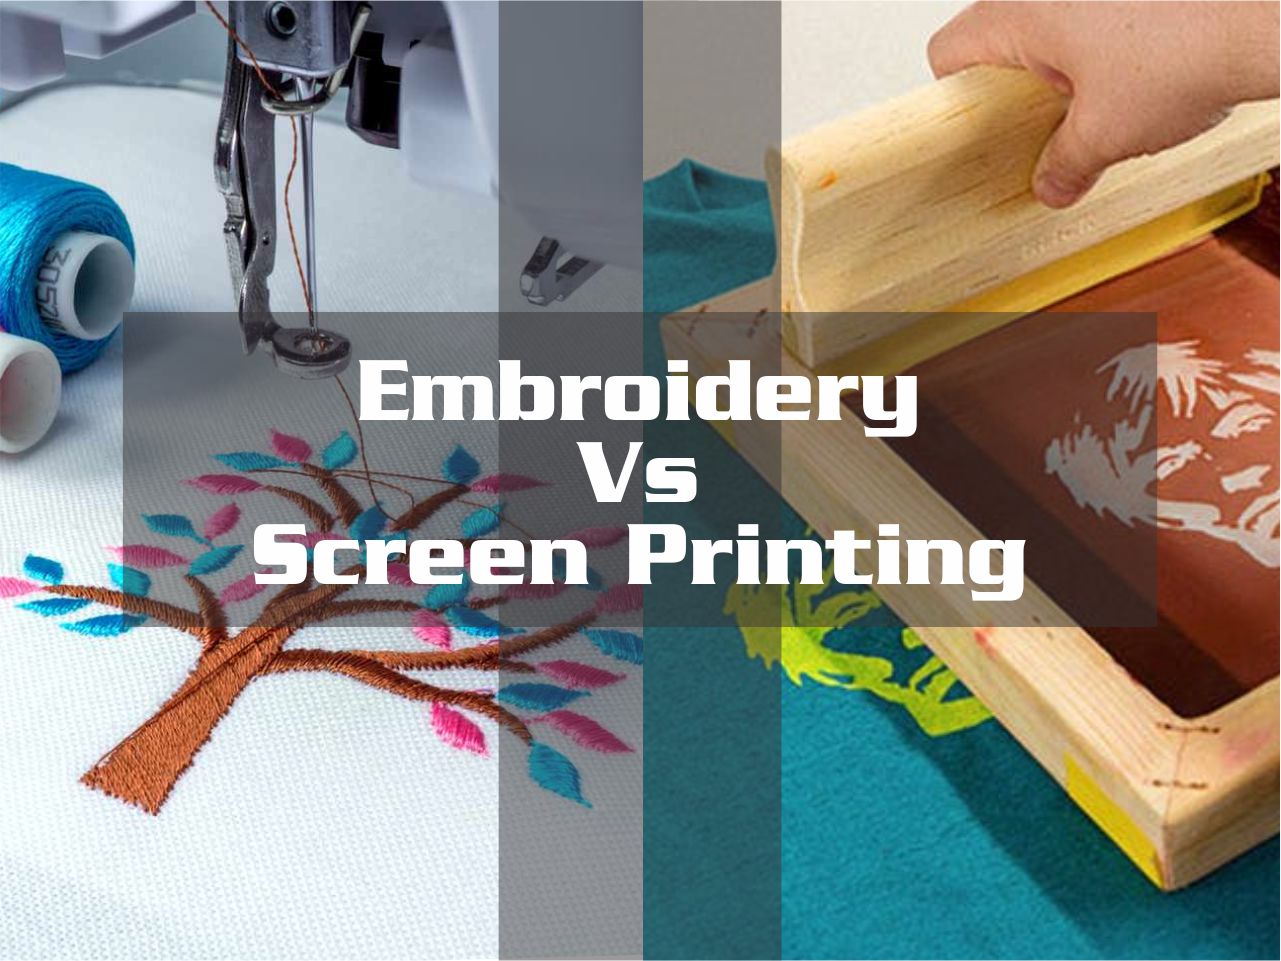 Embroidery vs screen printing